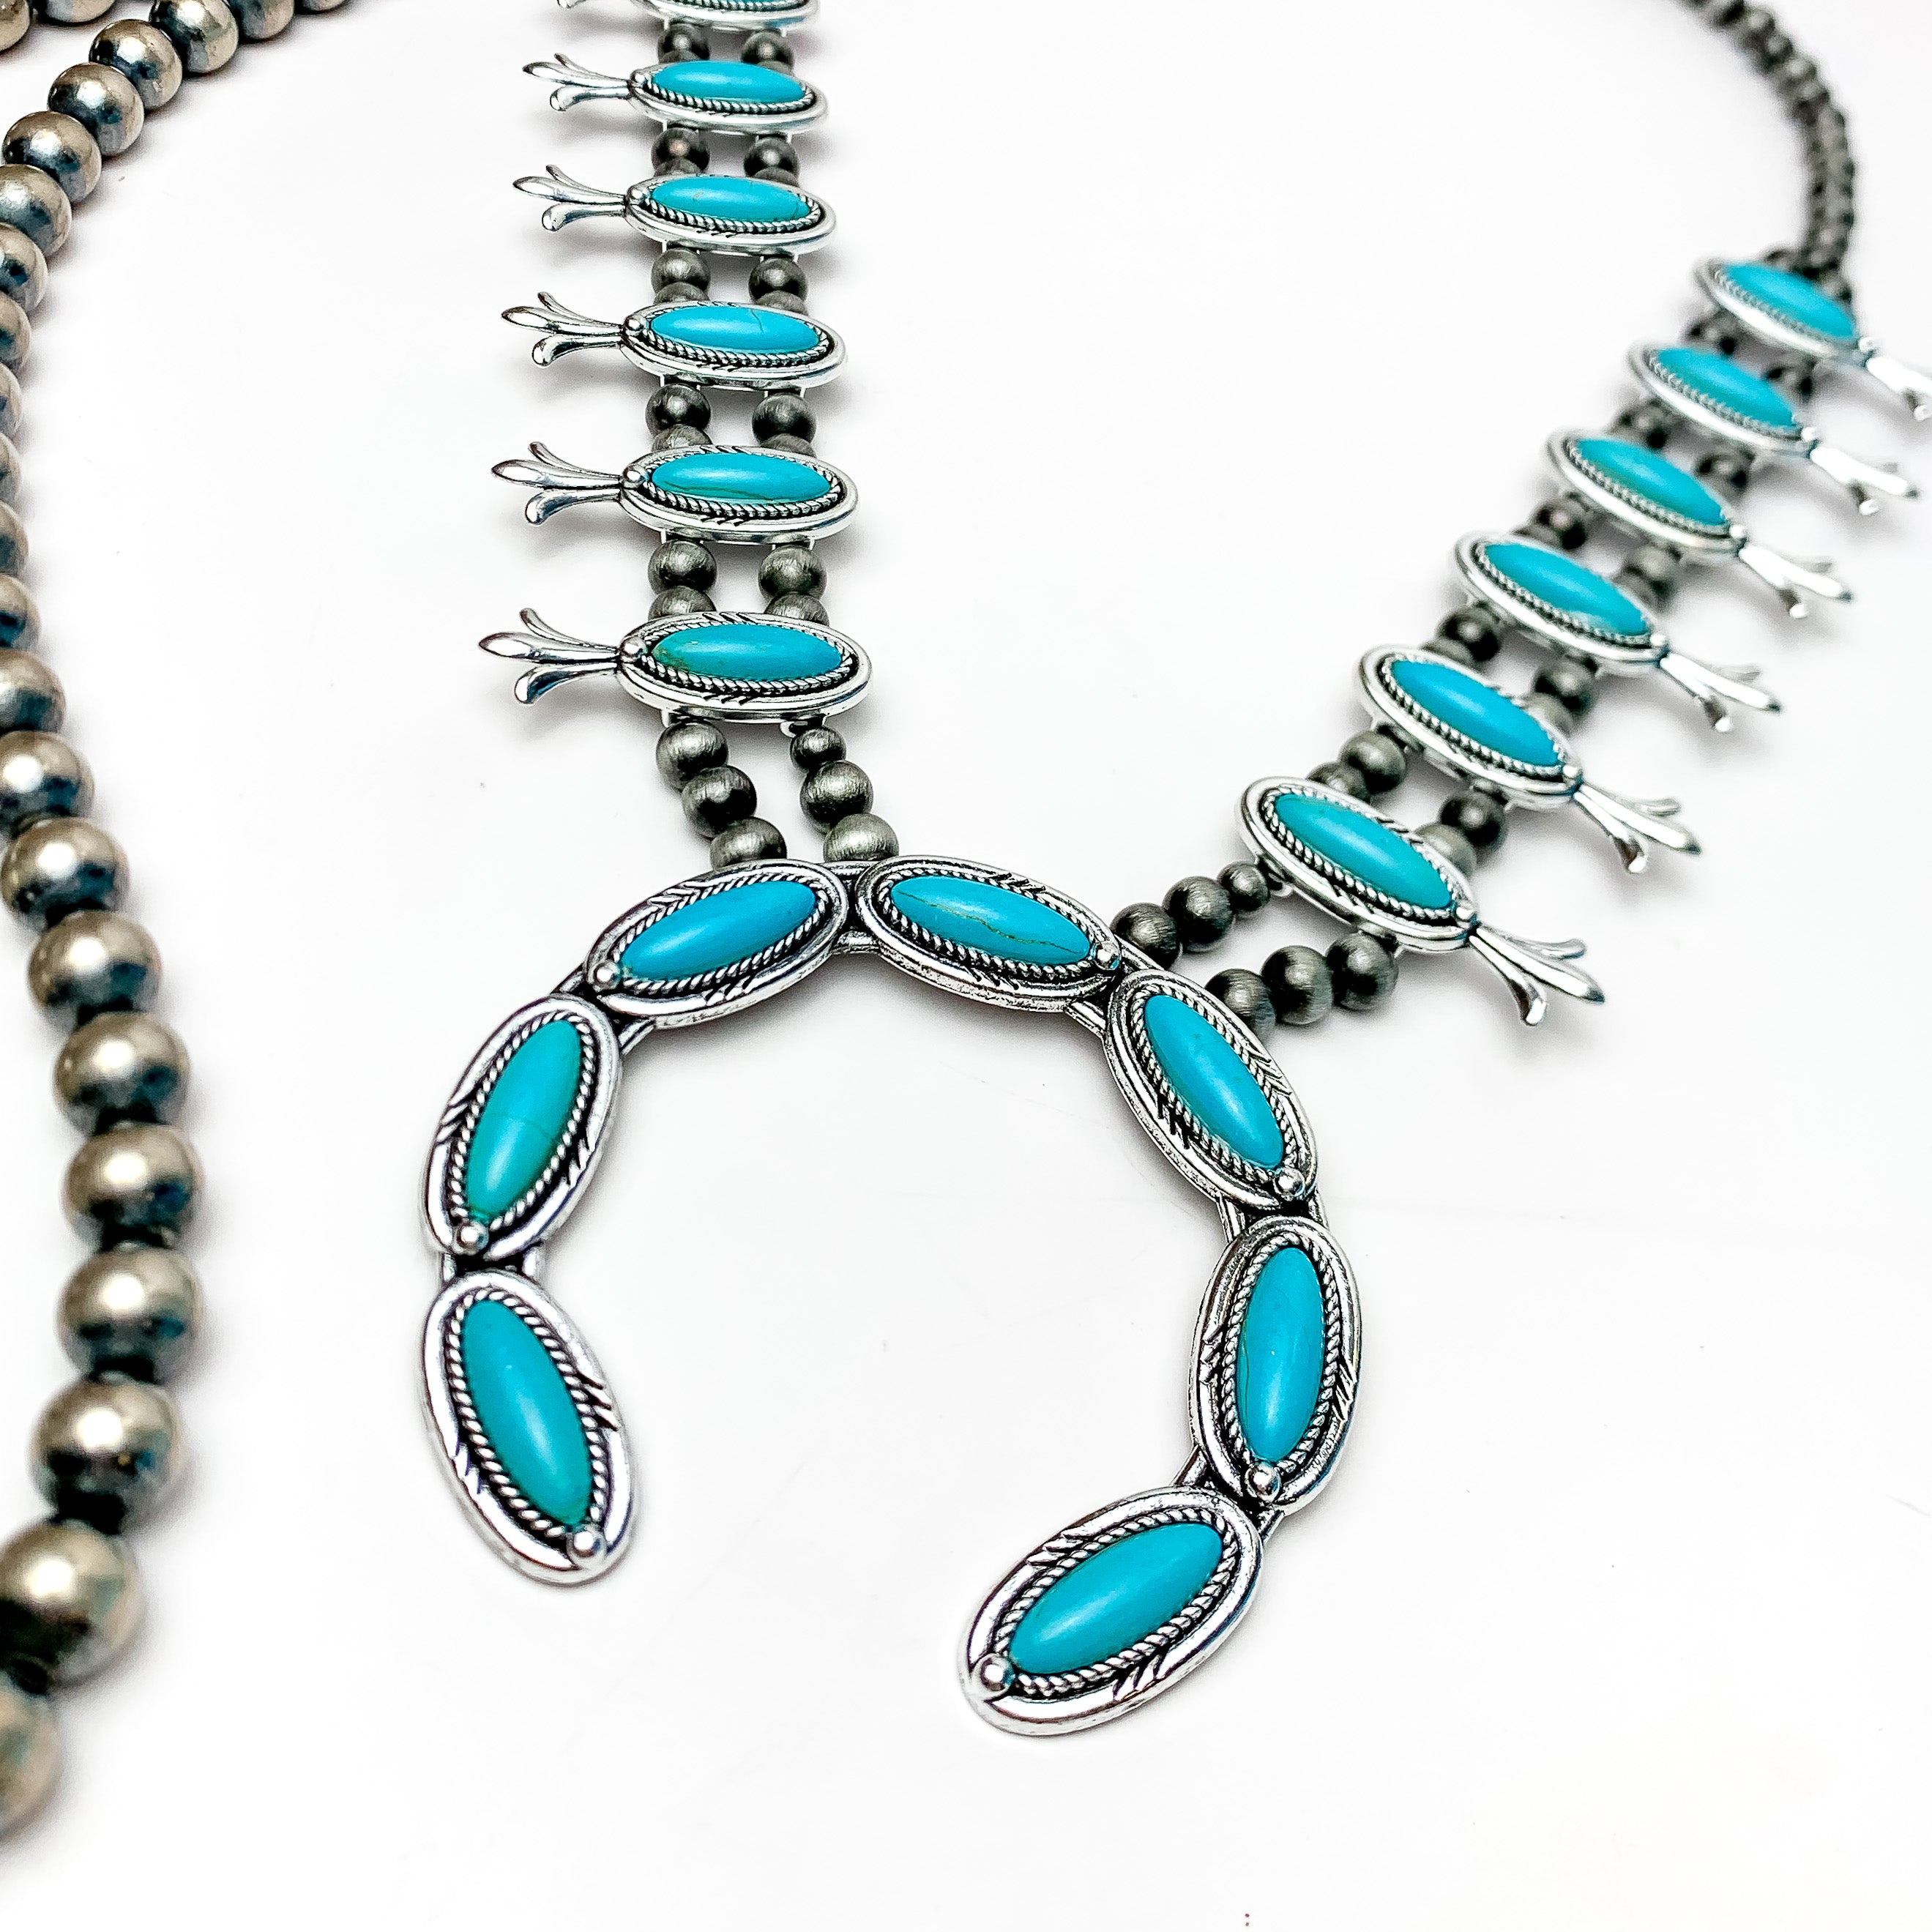 Silver Tone Pearl Squash Blossom Necklace With Stones in Turquoise - Giddy Up Glamour Boutique